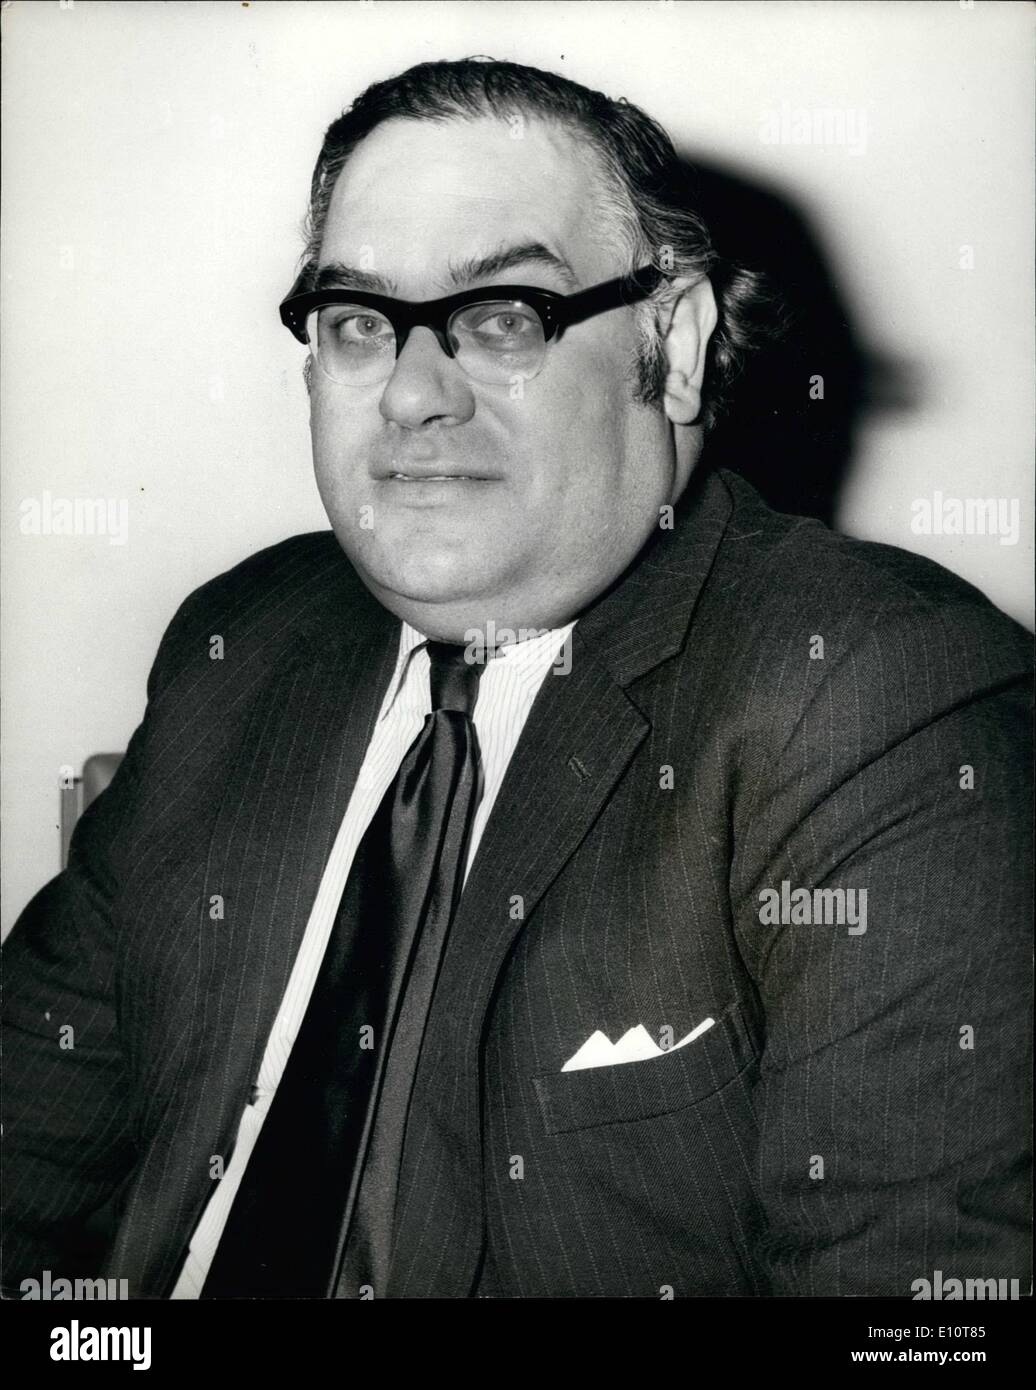 Mar. 03, 1974 - The New British Ambassador To United Nations; Photo hows Today's picture of Mr. Ivor Richart the new British Ambassador to the U.N. in New York. Stock Photo